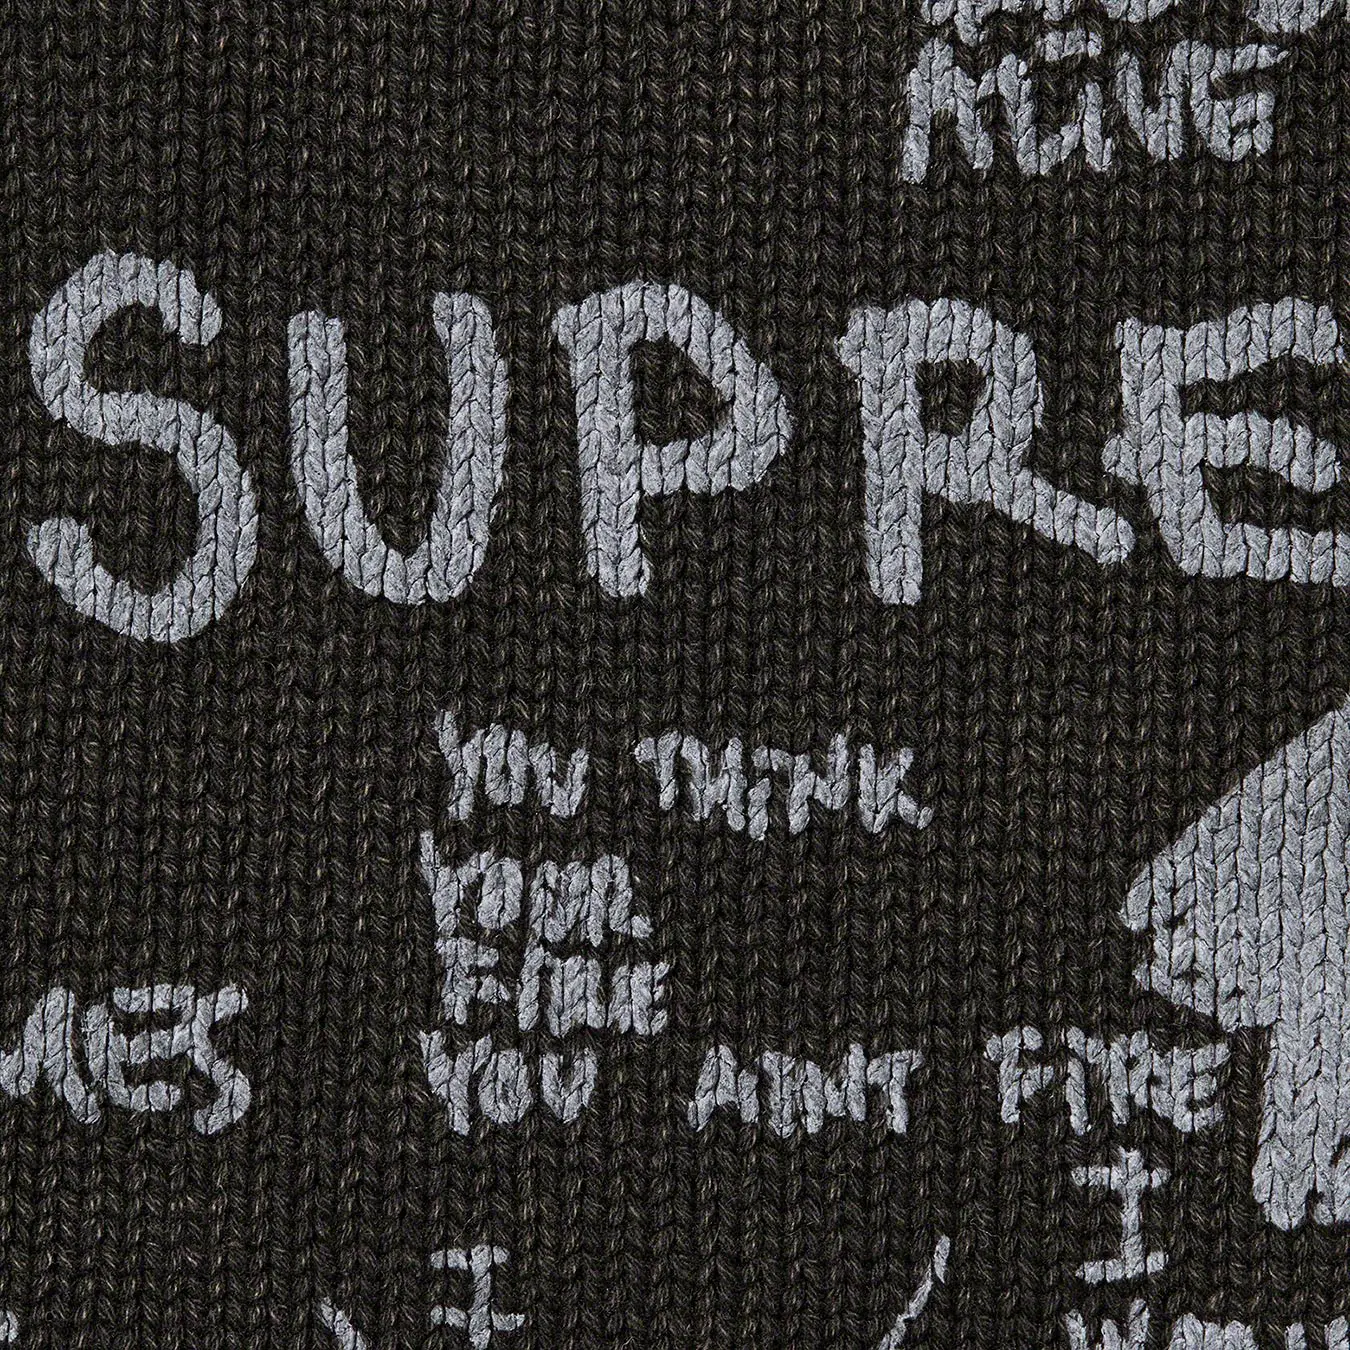 Gonz Poems Sweater | Supreme 23ss